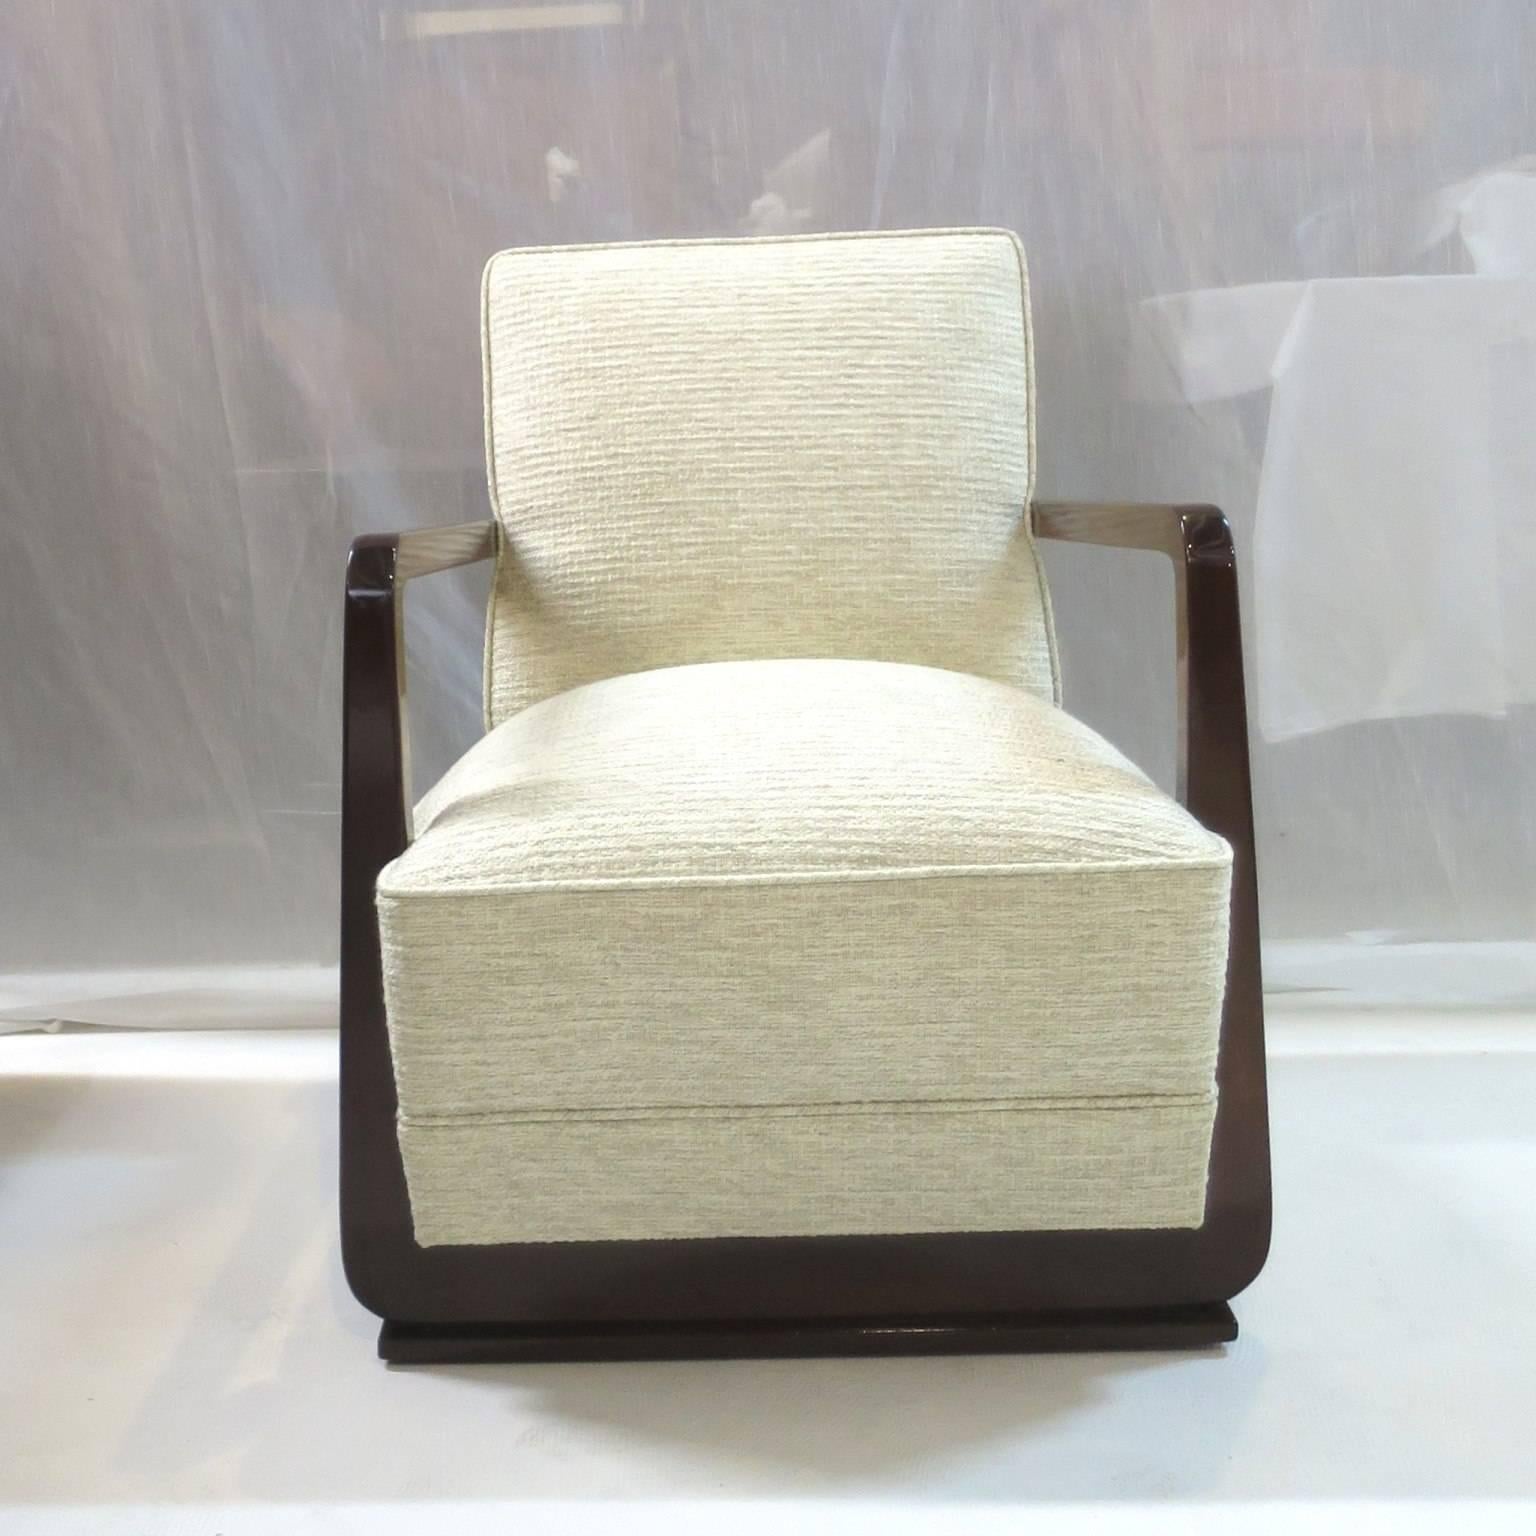 Recently refinished and reupholstered in a light fabric. 
Very cubistic frame shape in solid Mahogany wood. 
Extremely pure lines, great modernist design all around the piece as well as the back. 
Excellent comfort, very elegant armchair.